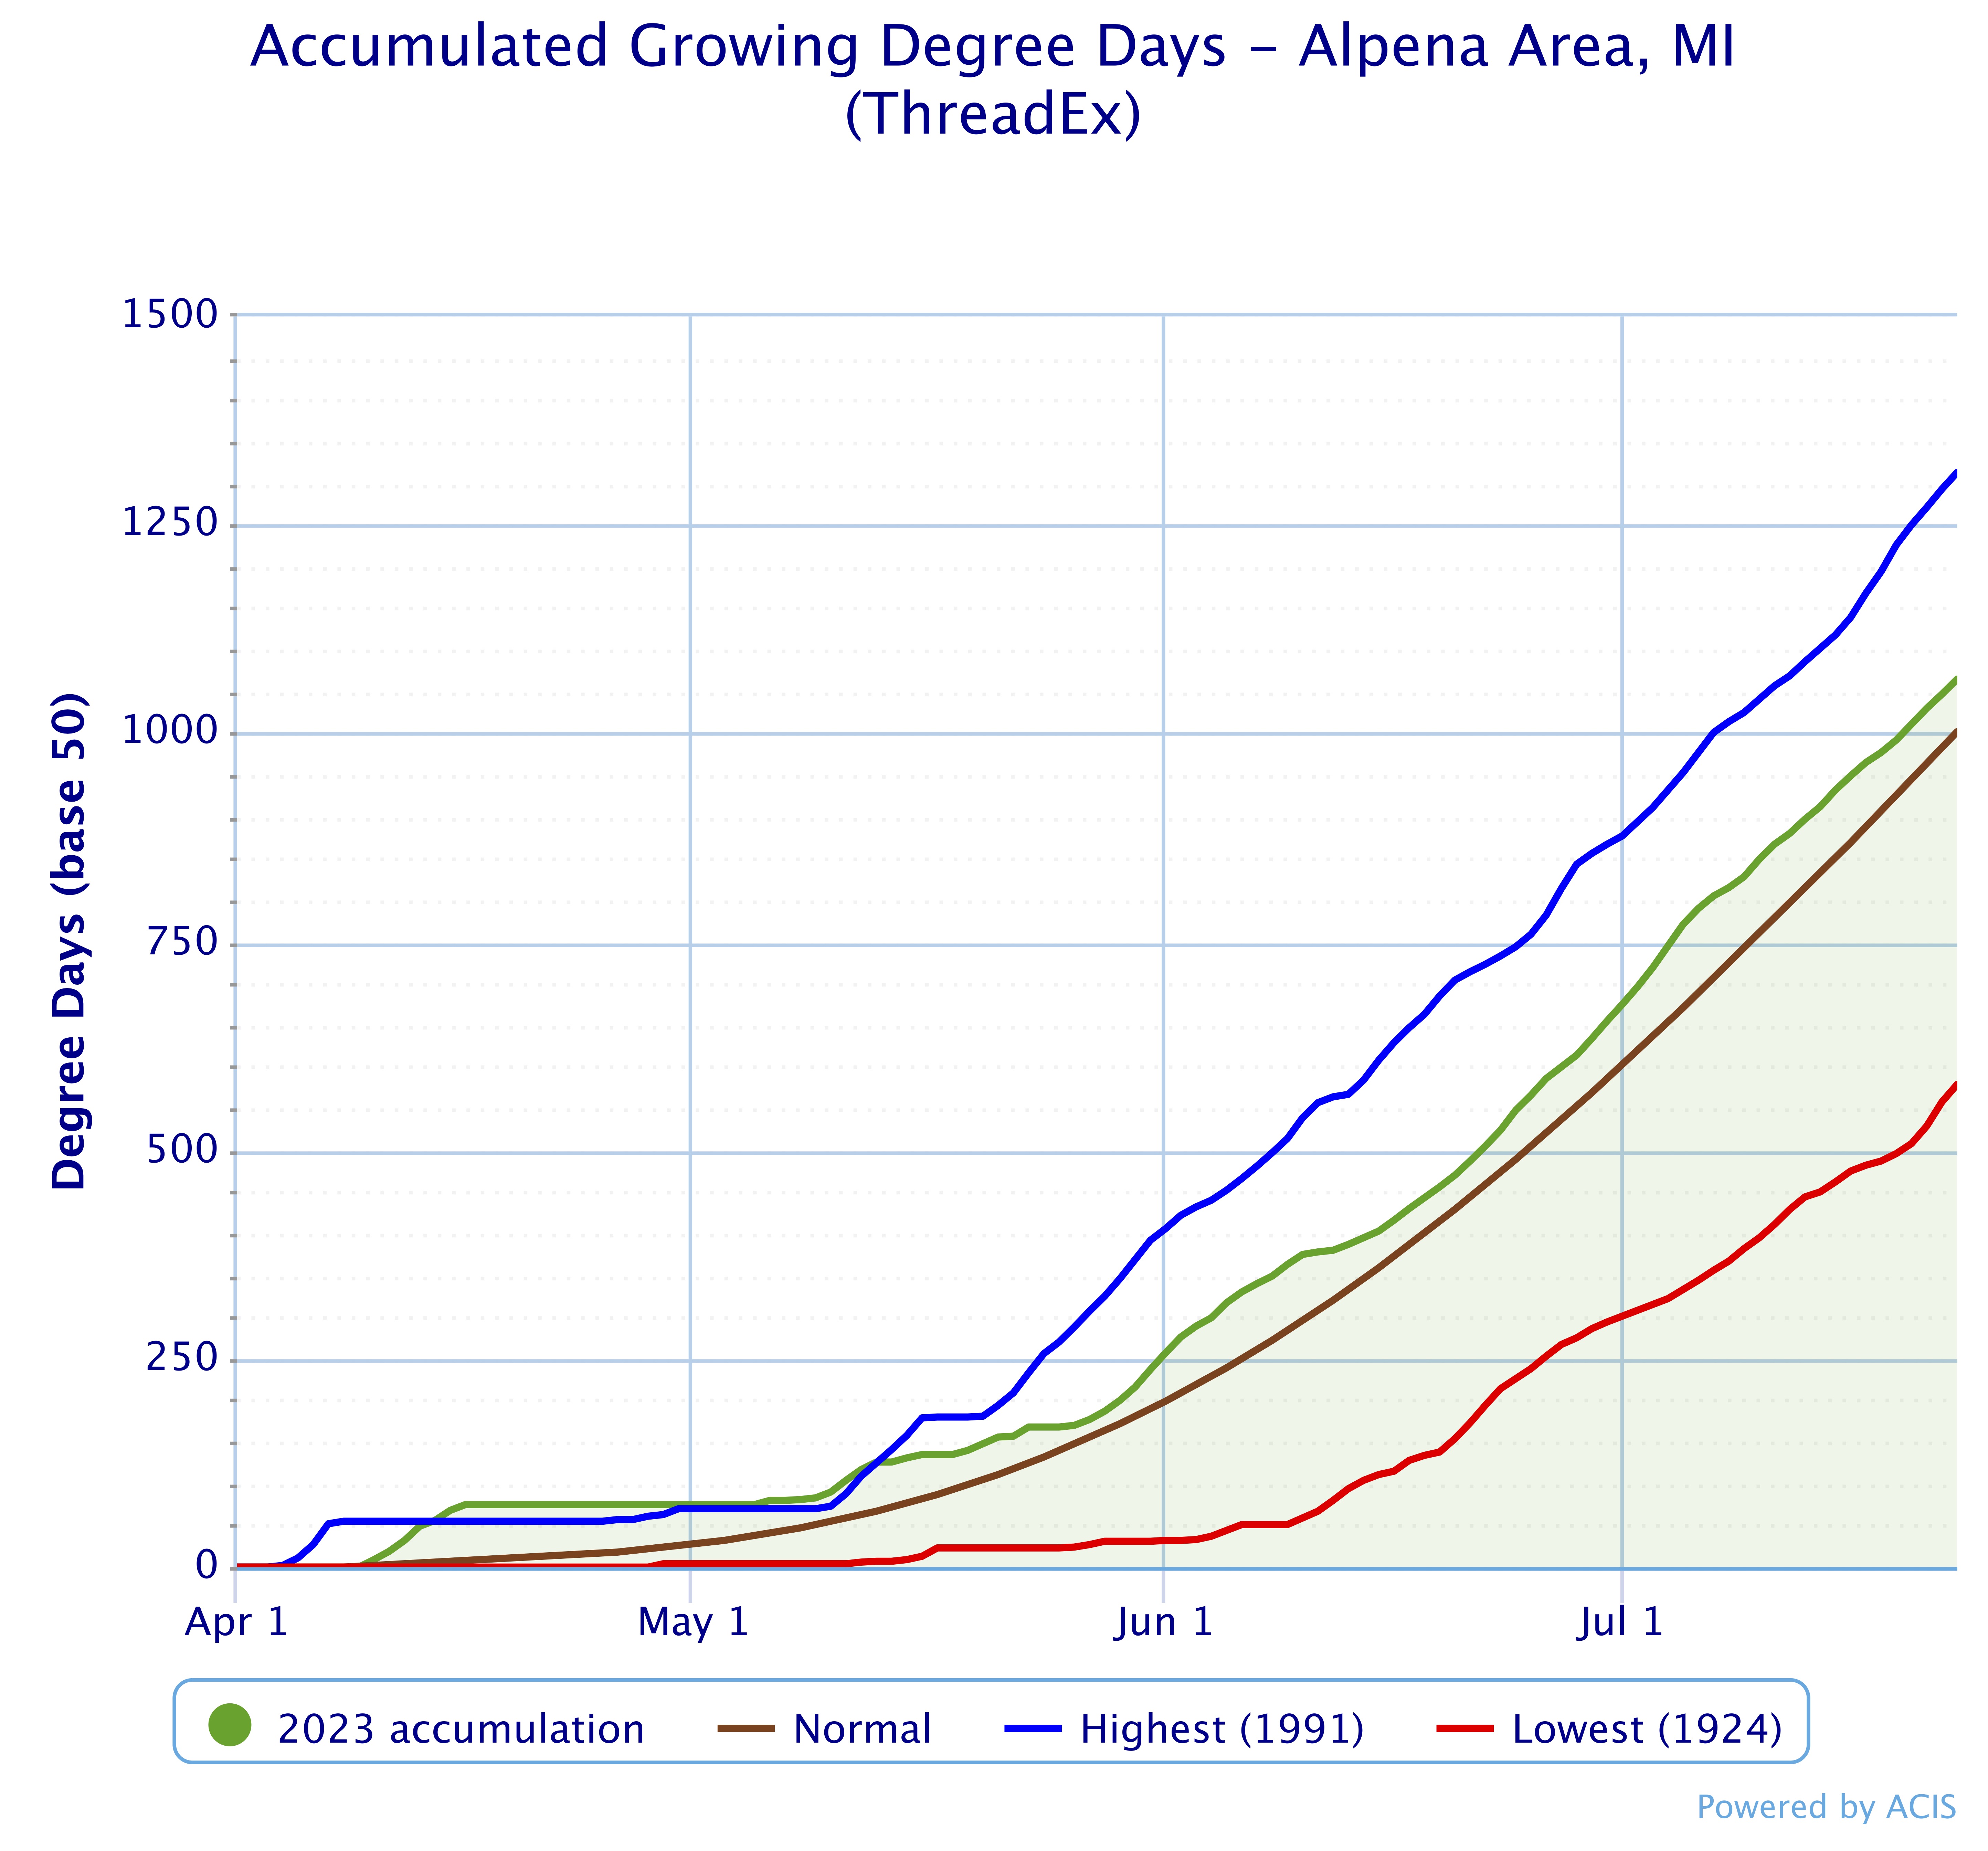 Accumulated Growing Degree Day Chart that shows accumulated growing degree days (Base 50) compared to highest, lowest, and normal (April 1- July 23, 2023)